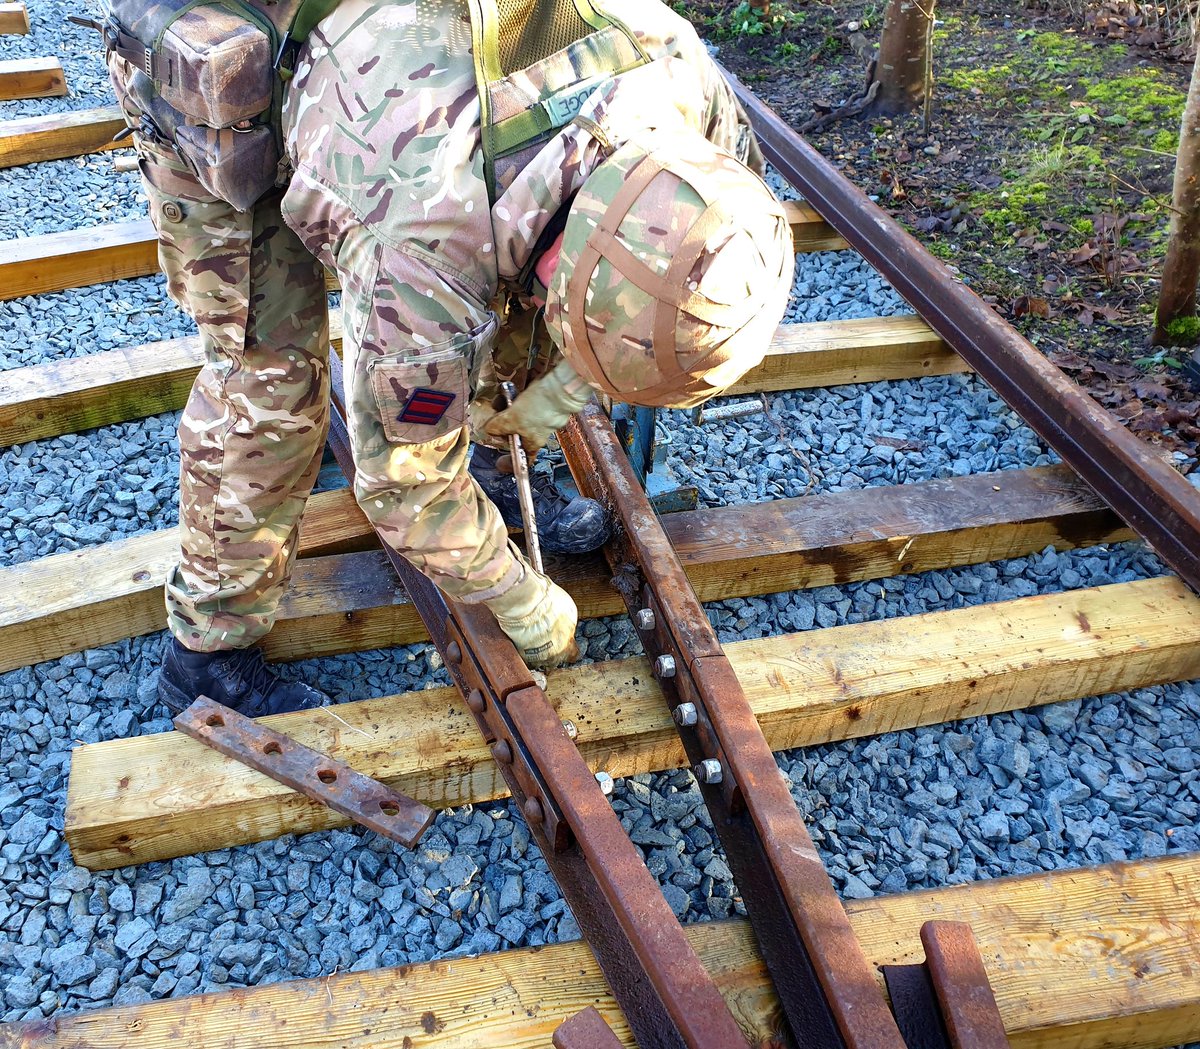 One of our @Proud_Sappers platelayers tightening bolts on closure rails on a narrow gauge S&C earlier this year at Southwold. 
#platelayer #507stre #royalengineers #exturnout20 #armyreserve #fr30 #wholeforce